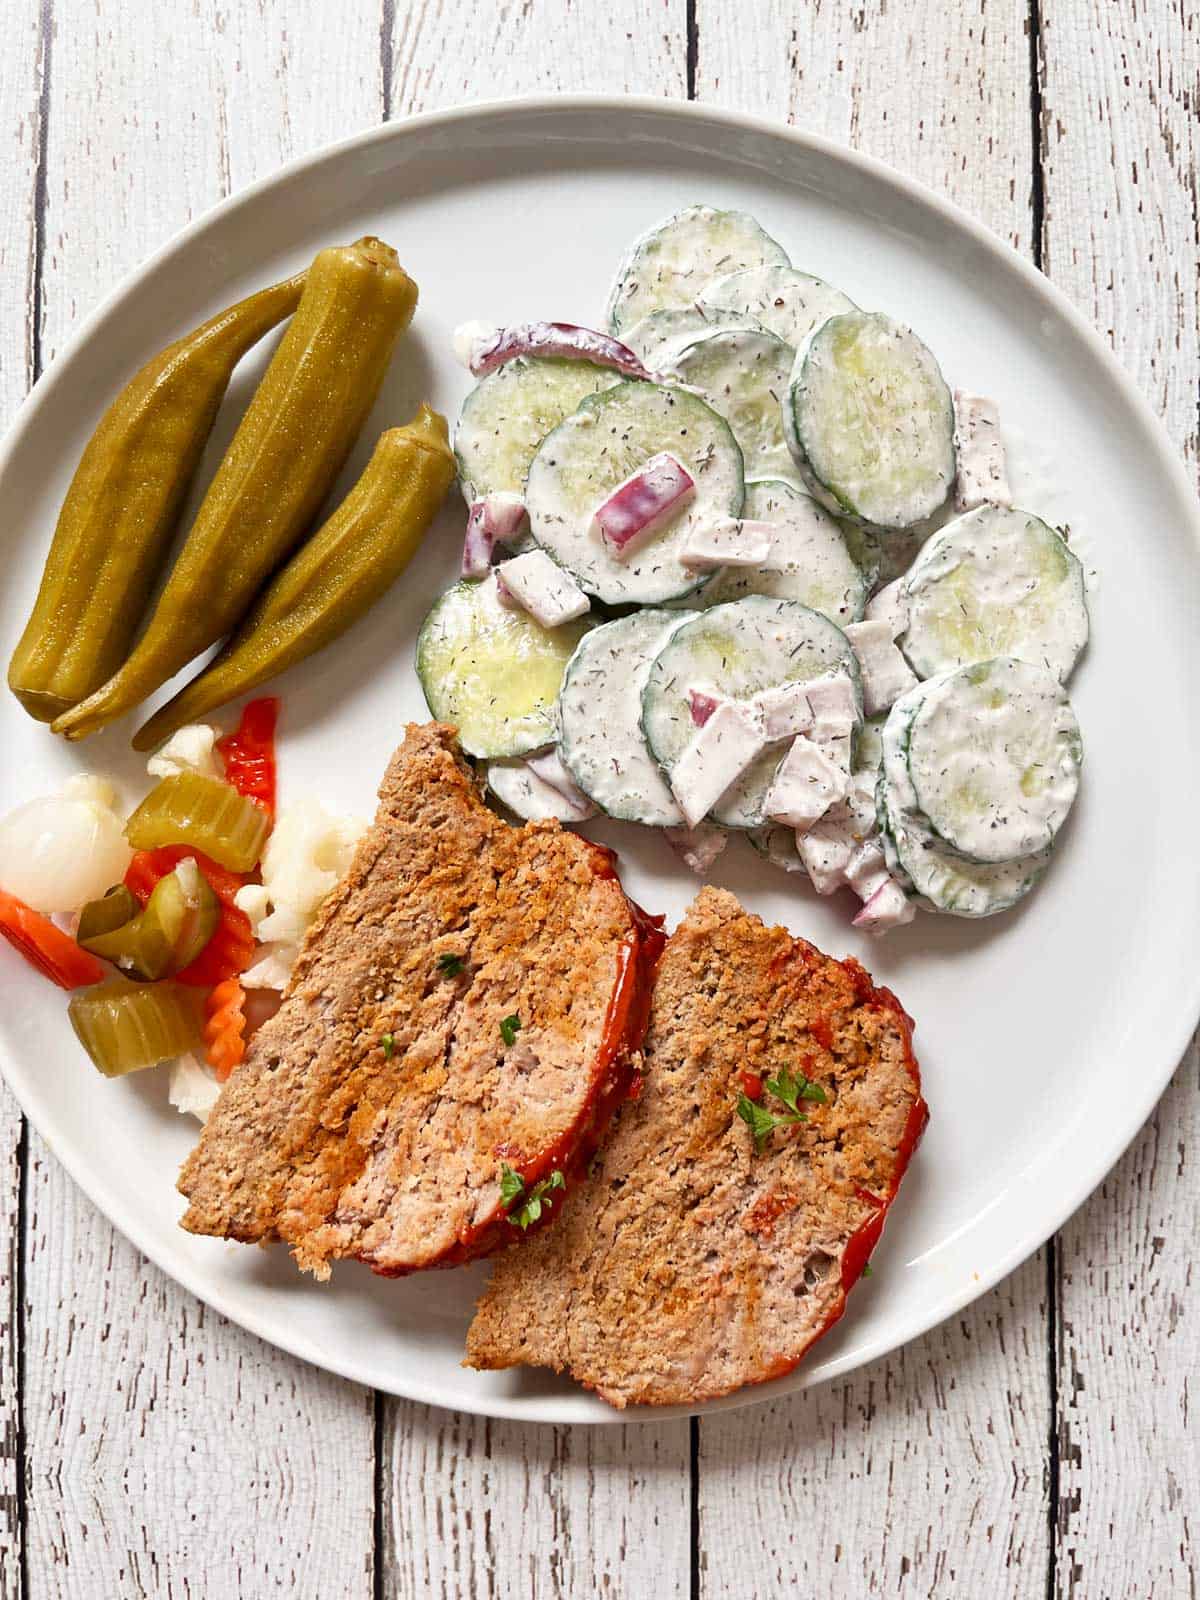 Turkey meatloaf is served with a cucumber salad and pickles.